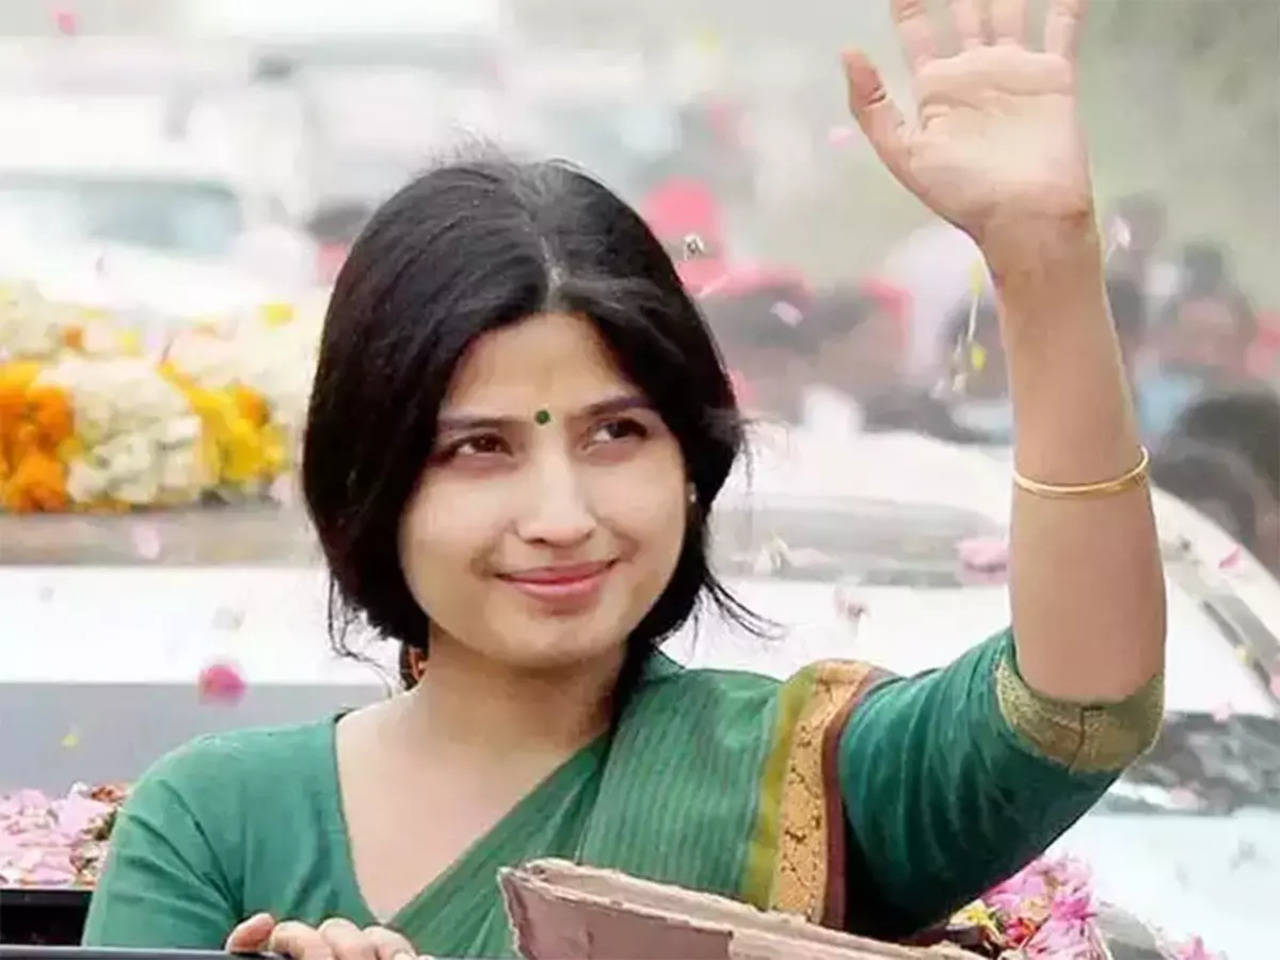 Dimple Yadav Samajwadi Party fields Dimple Yadav for Mainpuri bypoll Lucknow News Adult Pic Hq